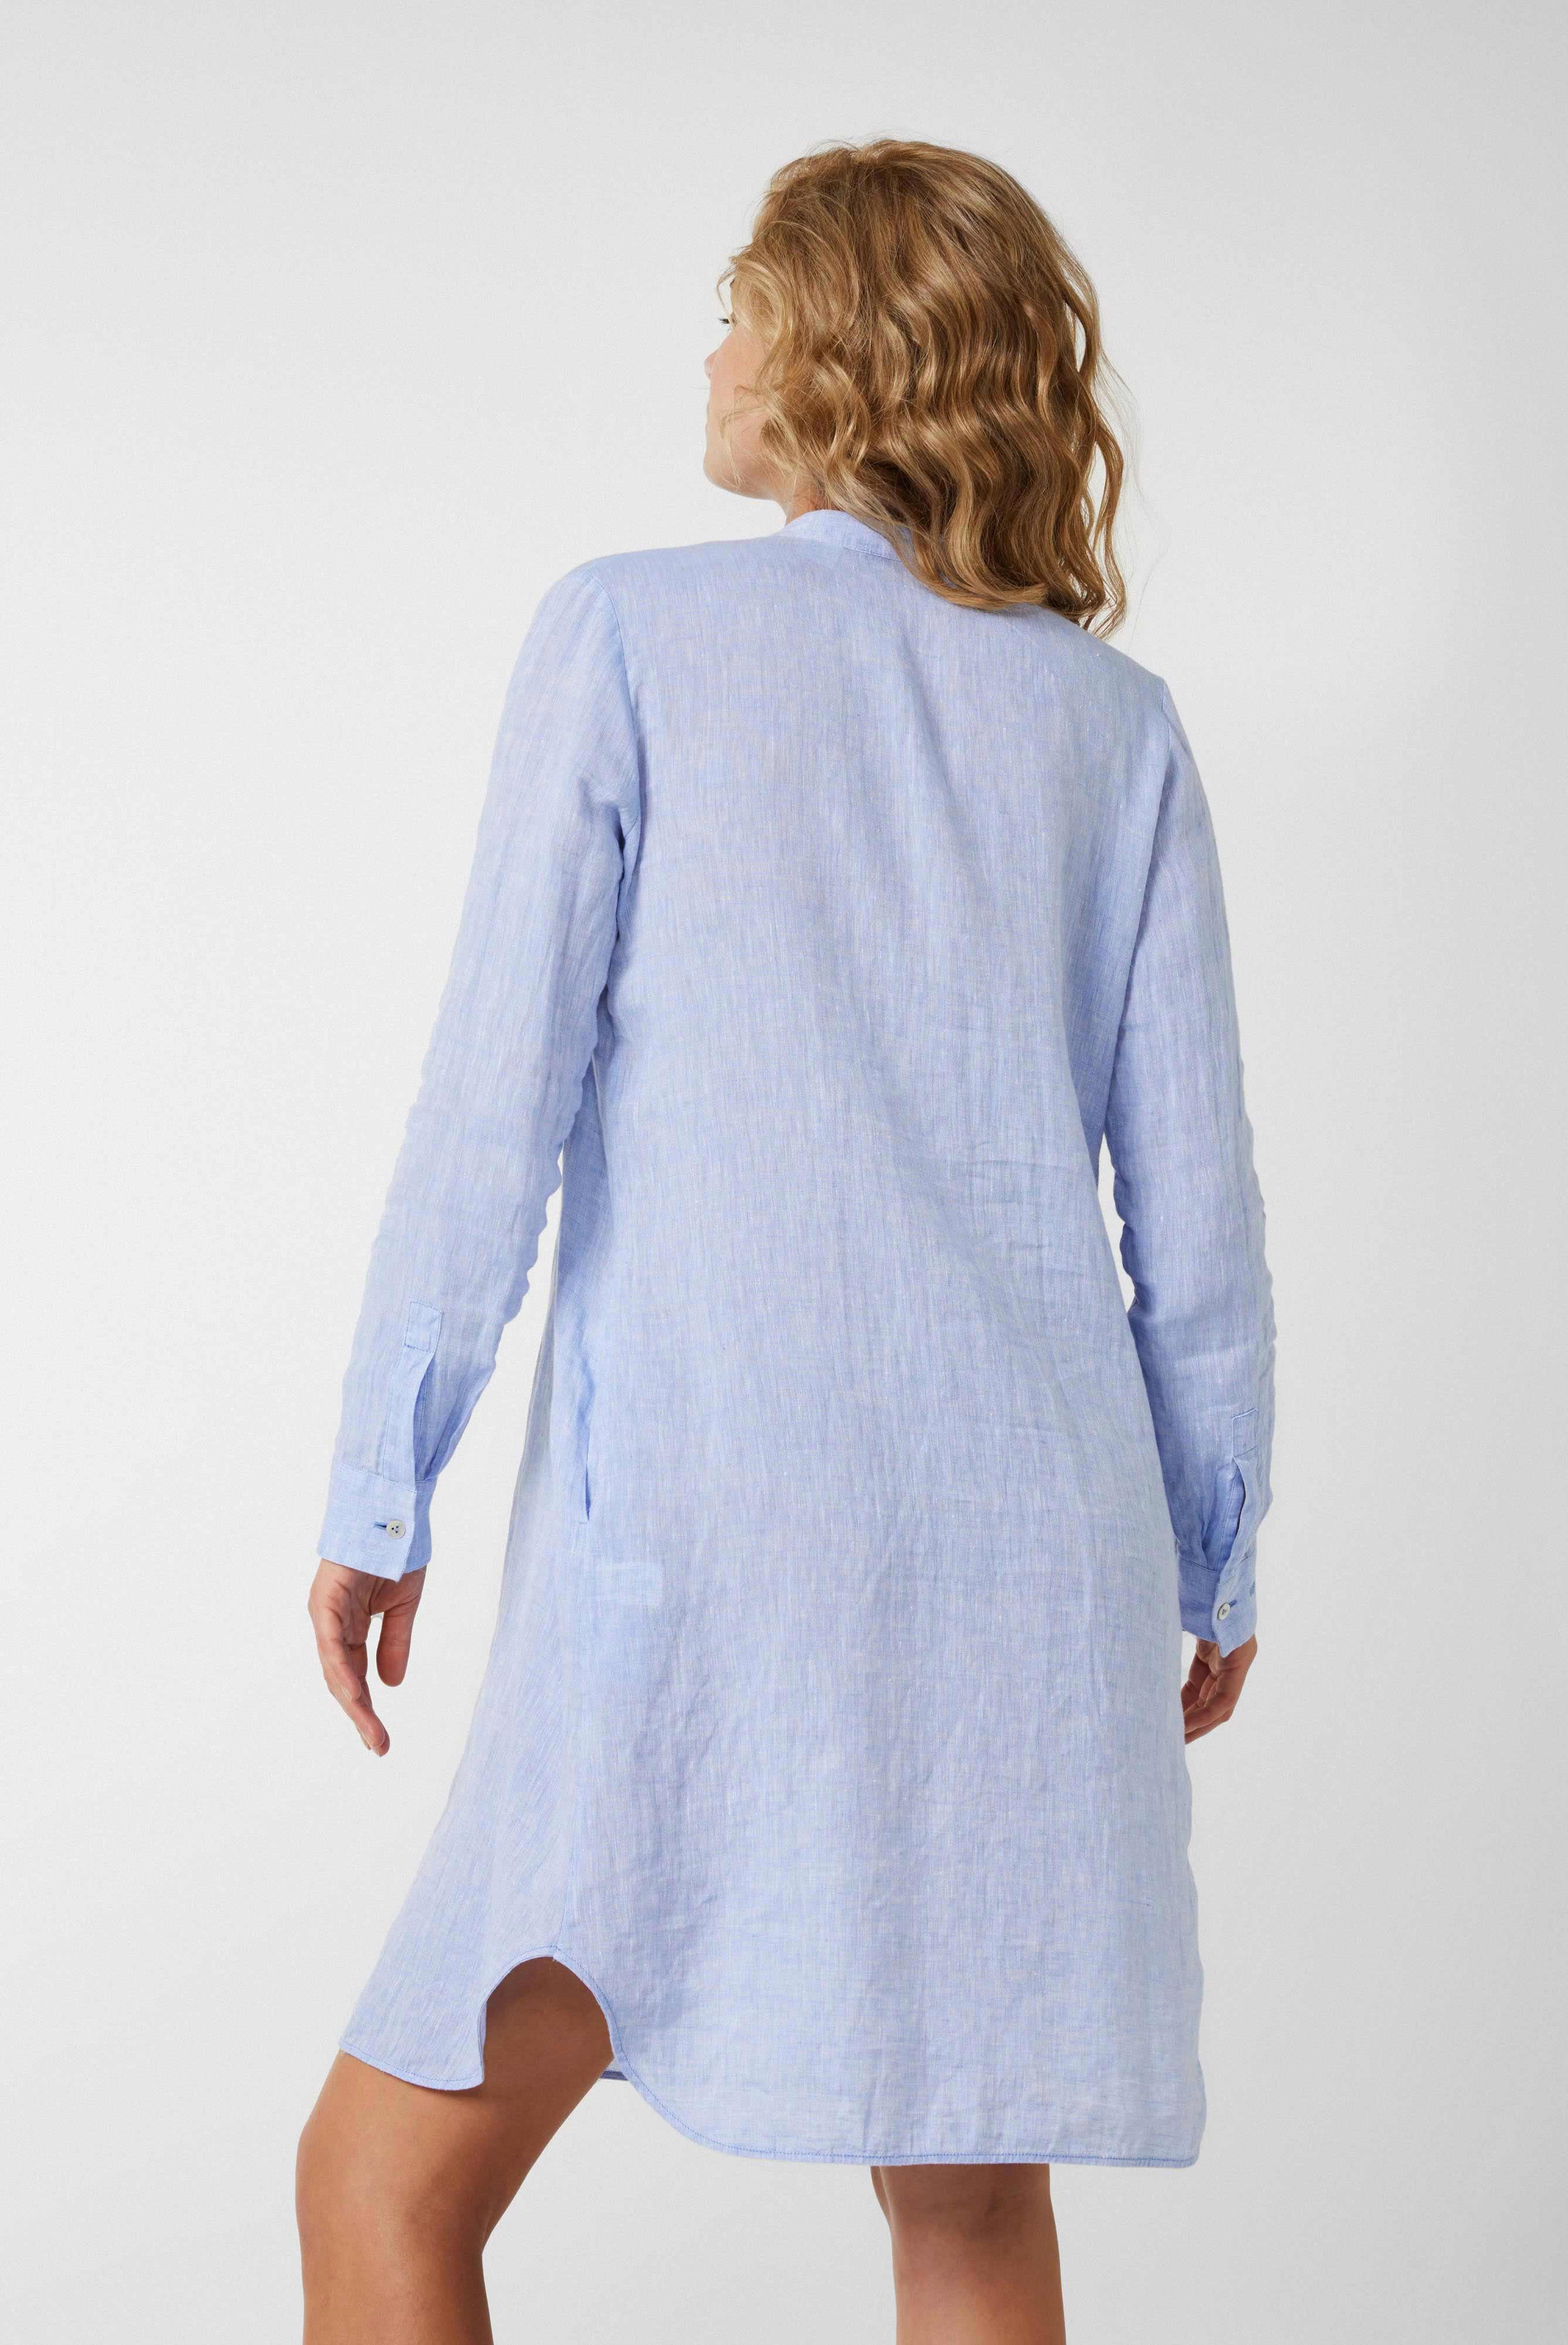 Dresses & Skirts+Knee-length dress with stand-up collar and ruffles made of linen+05.657K.2L.155038.710.32